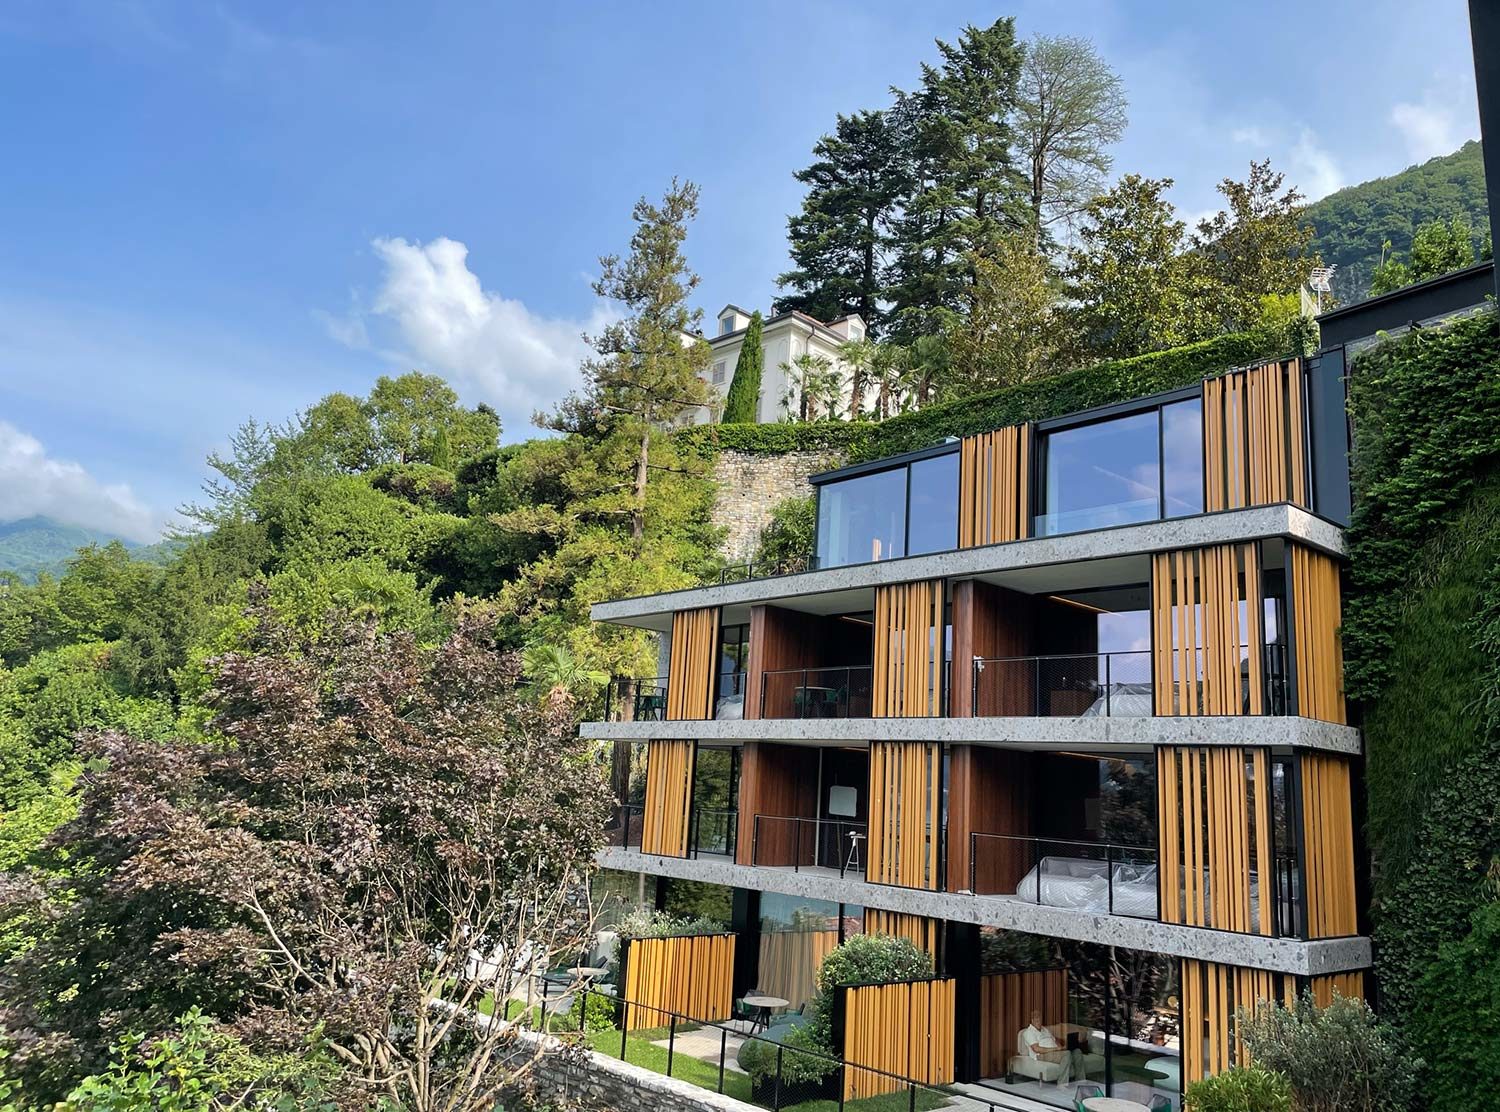 Il Sereno Designed by the architect genius Patricia Urquiola, Il Sereno has been celebrated as the first contemporary property of its kind on Lake Como